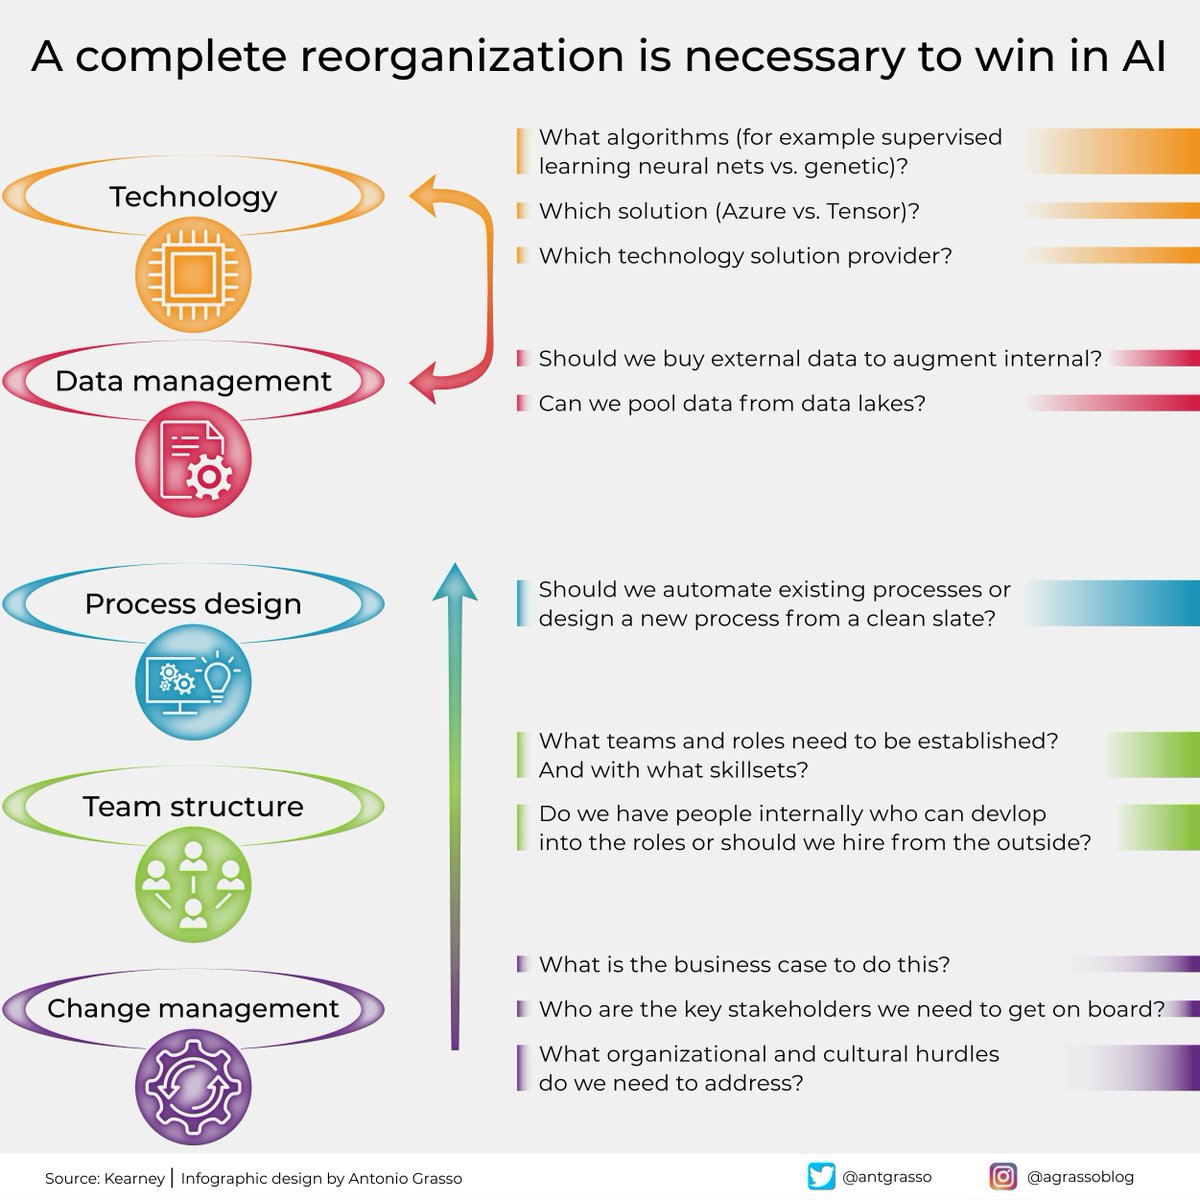 As always, technology isn't the only part of the puzzle. For AI as well, to overcome the challenges of adoption, it's necessary to act on processes, people, and the entire organization without forgetting data literacy. Microblog & social design >> @antgrasso via @LindaGrass0 #AI